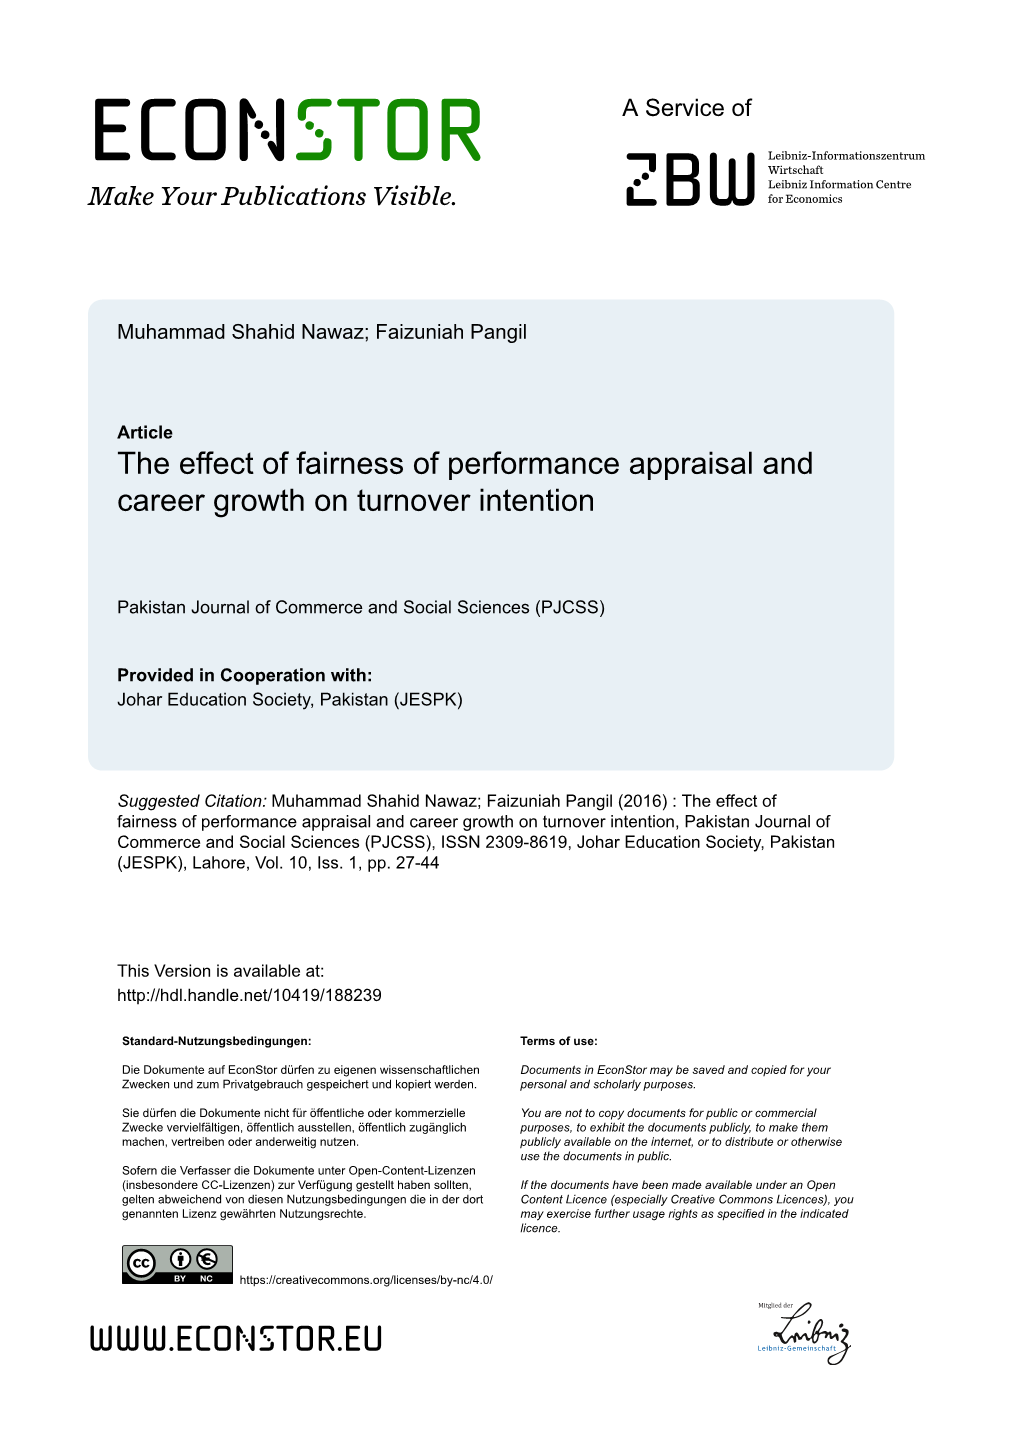 The Effect of Fairness of Performance Appraisal and Career Growth on Turnover Intention